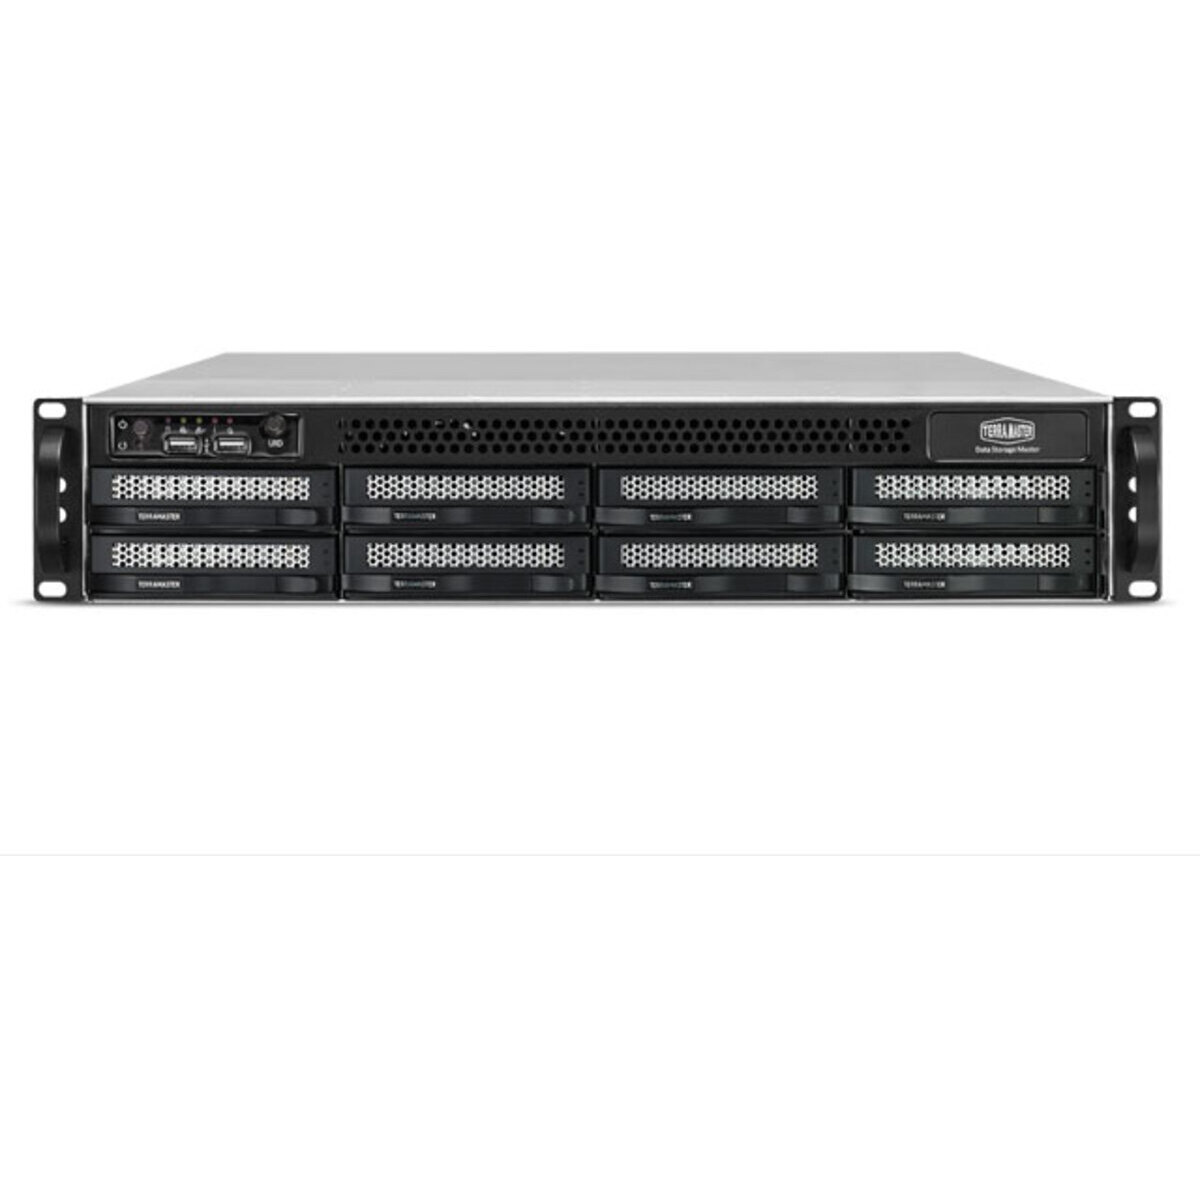 TerraMaster U8-522-9400 64tb 8-Bay RackMount Large Business / Enterprise NAS - Network Attached Storage Device 8x8tb TeamGroup EX2 Elite T253E2008T0C101 2.5 550/520MB/s SATA 6Gb/s SSD CONSUMER Class Drives Installed - Burn-In Tested U8-522-9400